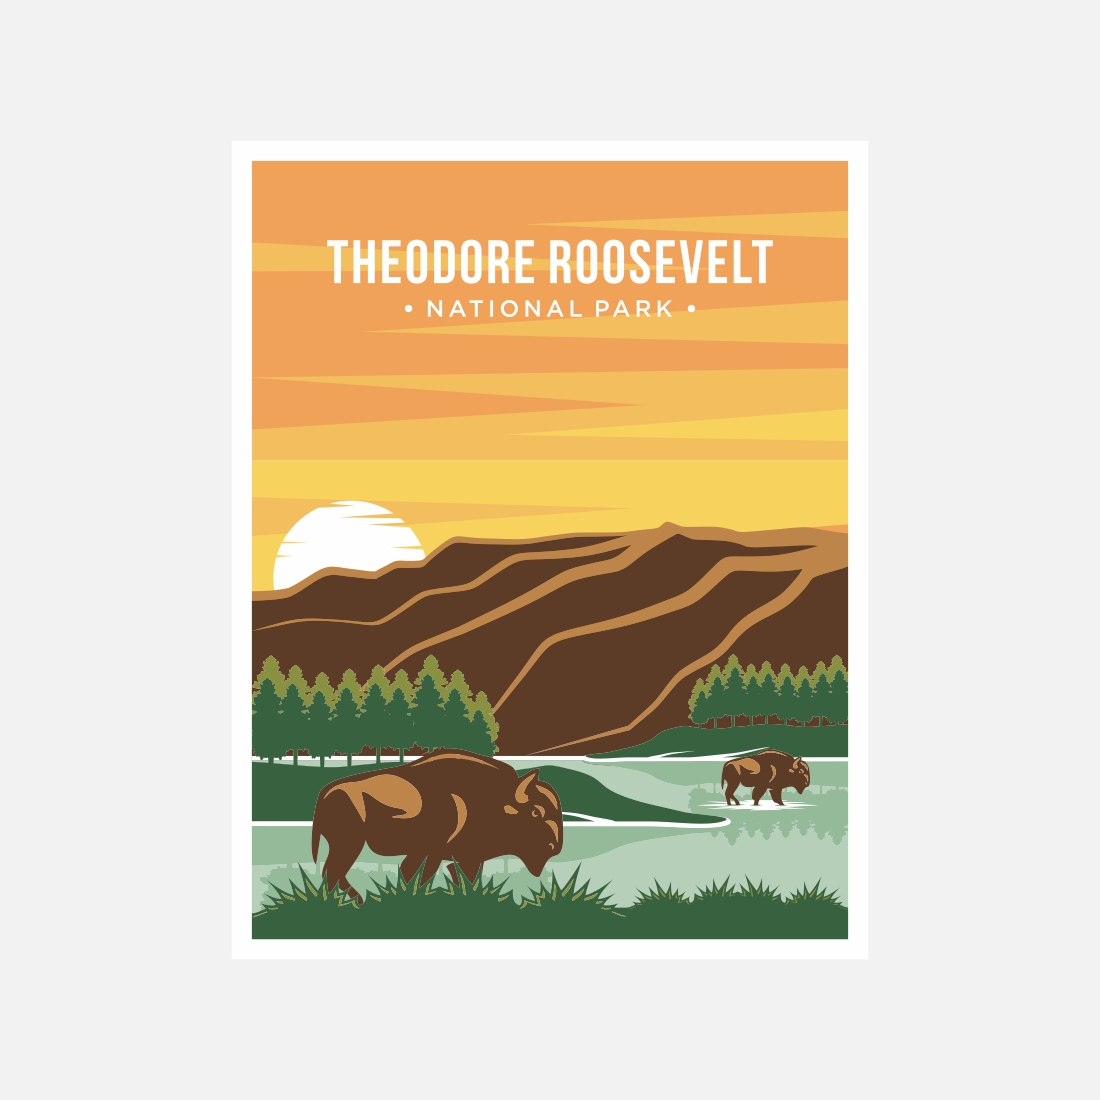 Theodore Roosevelt National Park poster vector illustration design – Only $8 preview image.